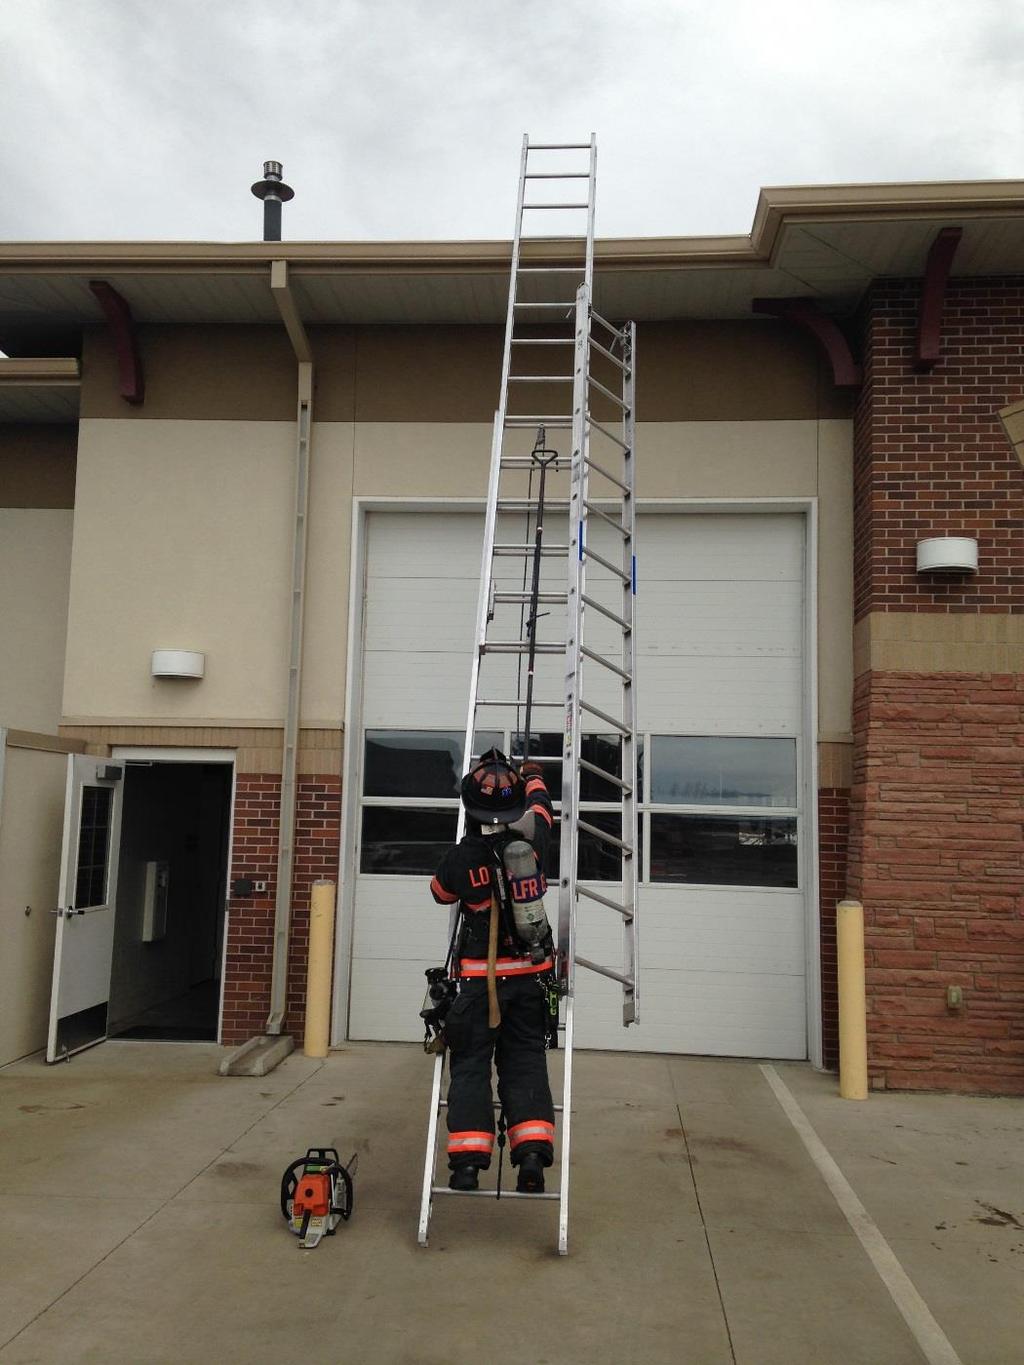 #14 Attach the trash hook to the highest point you can quickly reach in the middle of the extension ladder so that the climbing firefighter can easily control the roof hook and roof ladder as they